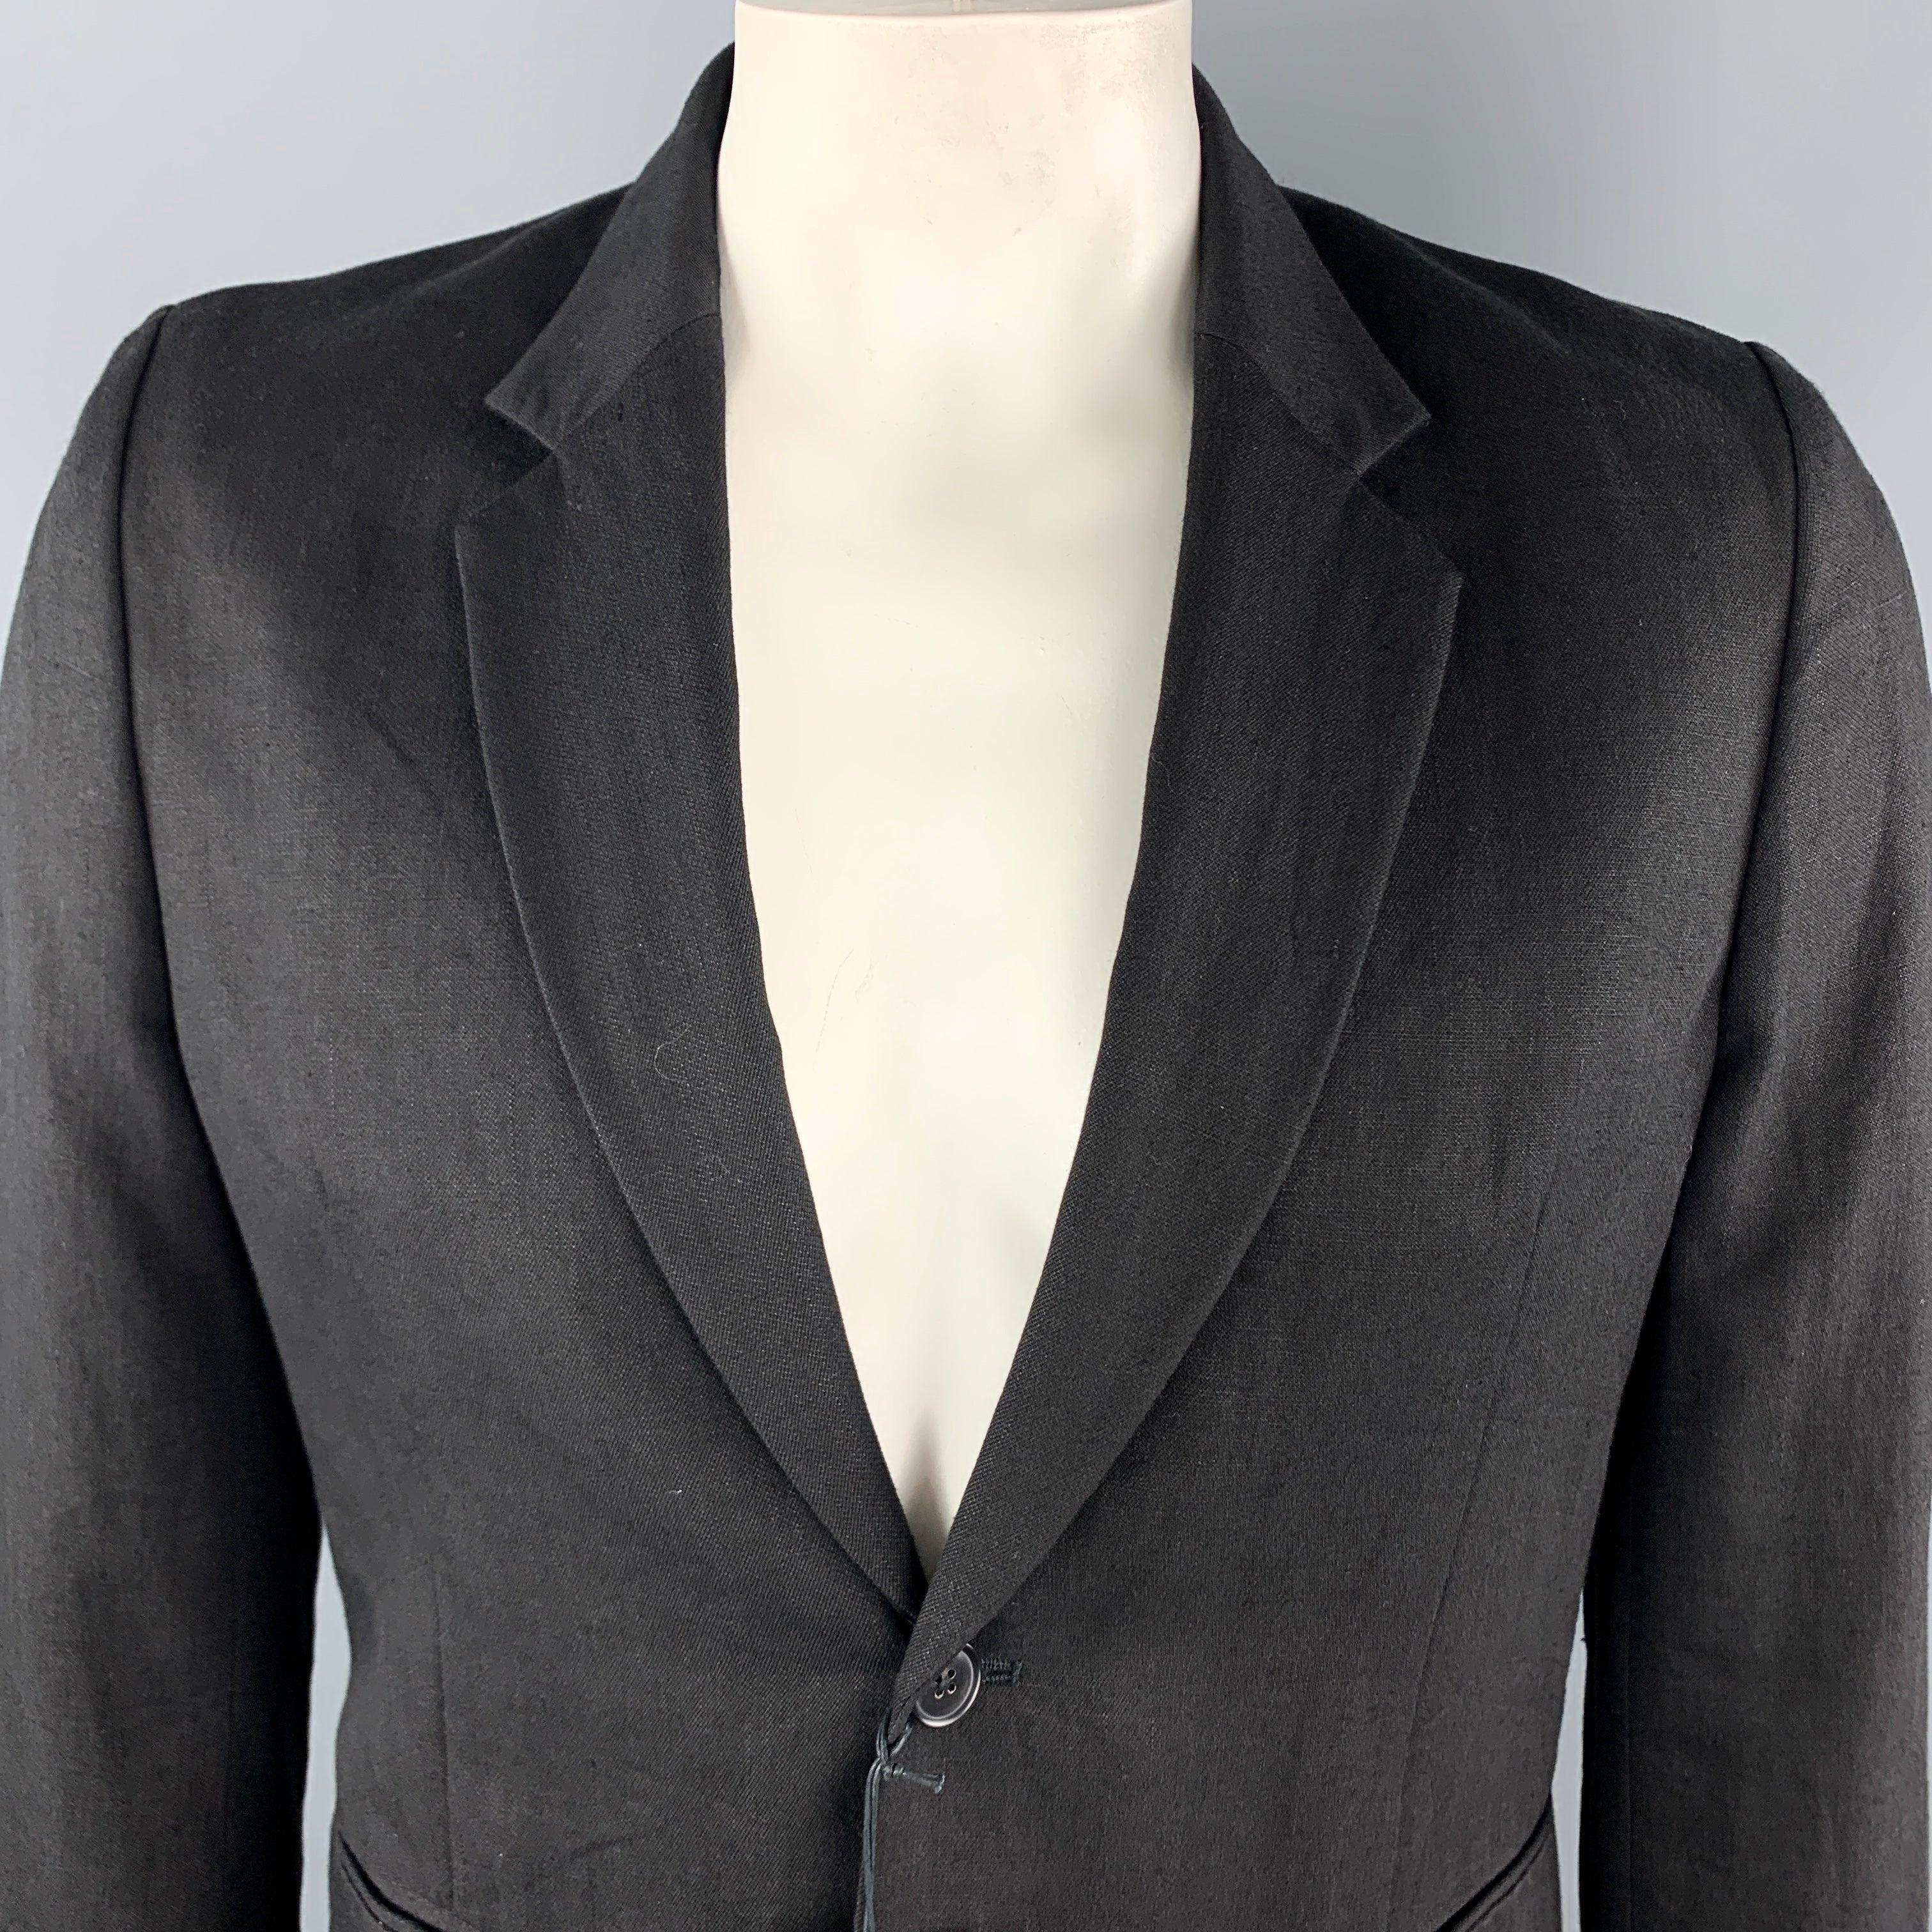 PAUL SMITH Sport Coat comes in a solid black linen / wool material, with a notch lapel, slit pockets, a single button at closure, single breasted, unbuttoned cuffs, unlined. Made in Italy.New with Tags. 

Marked:   No size 

Measurements: 
